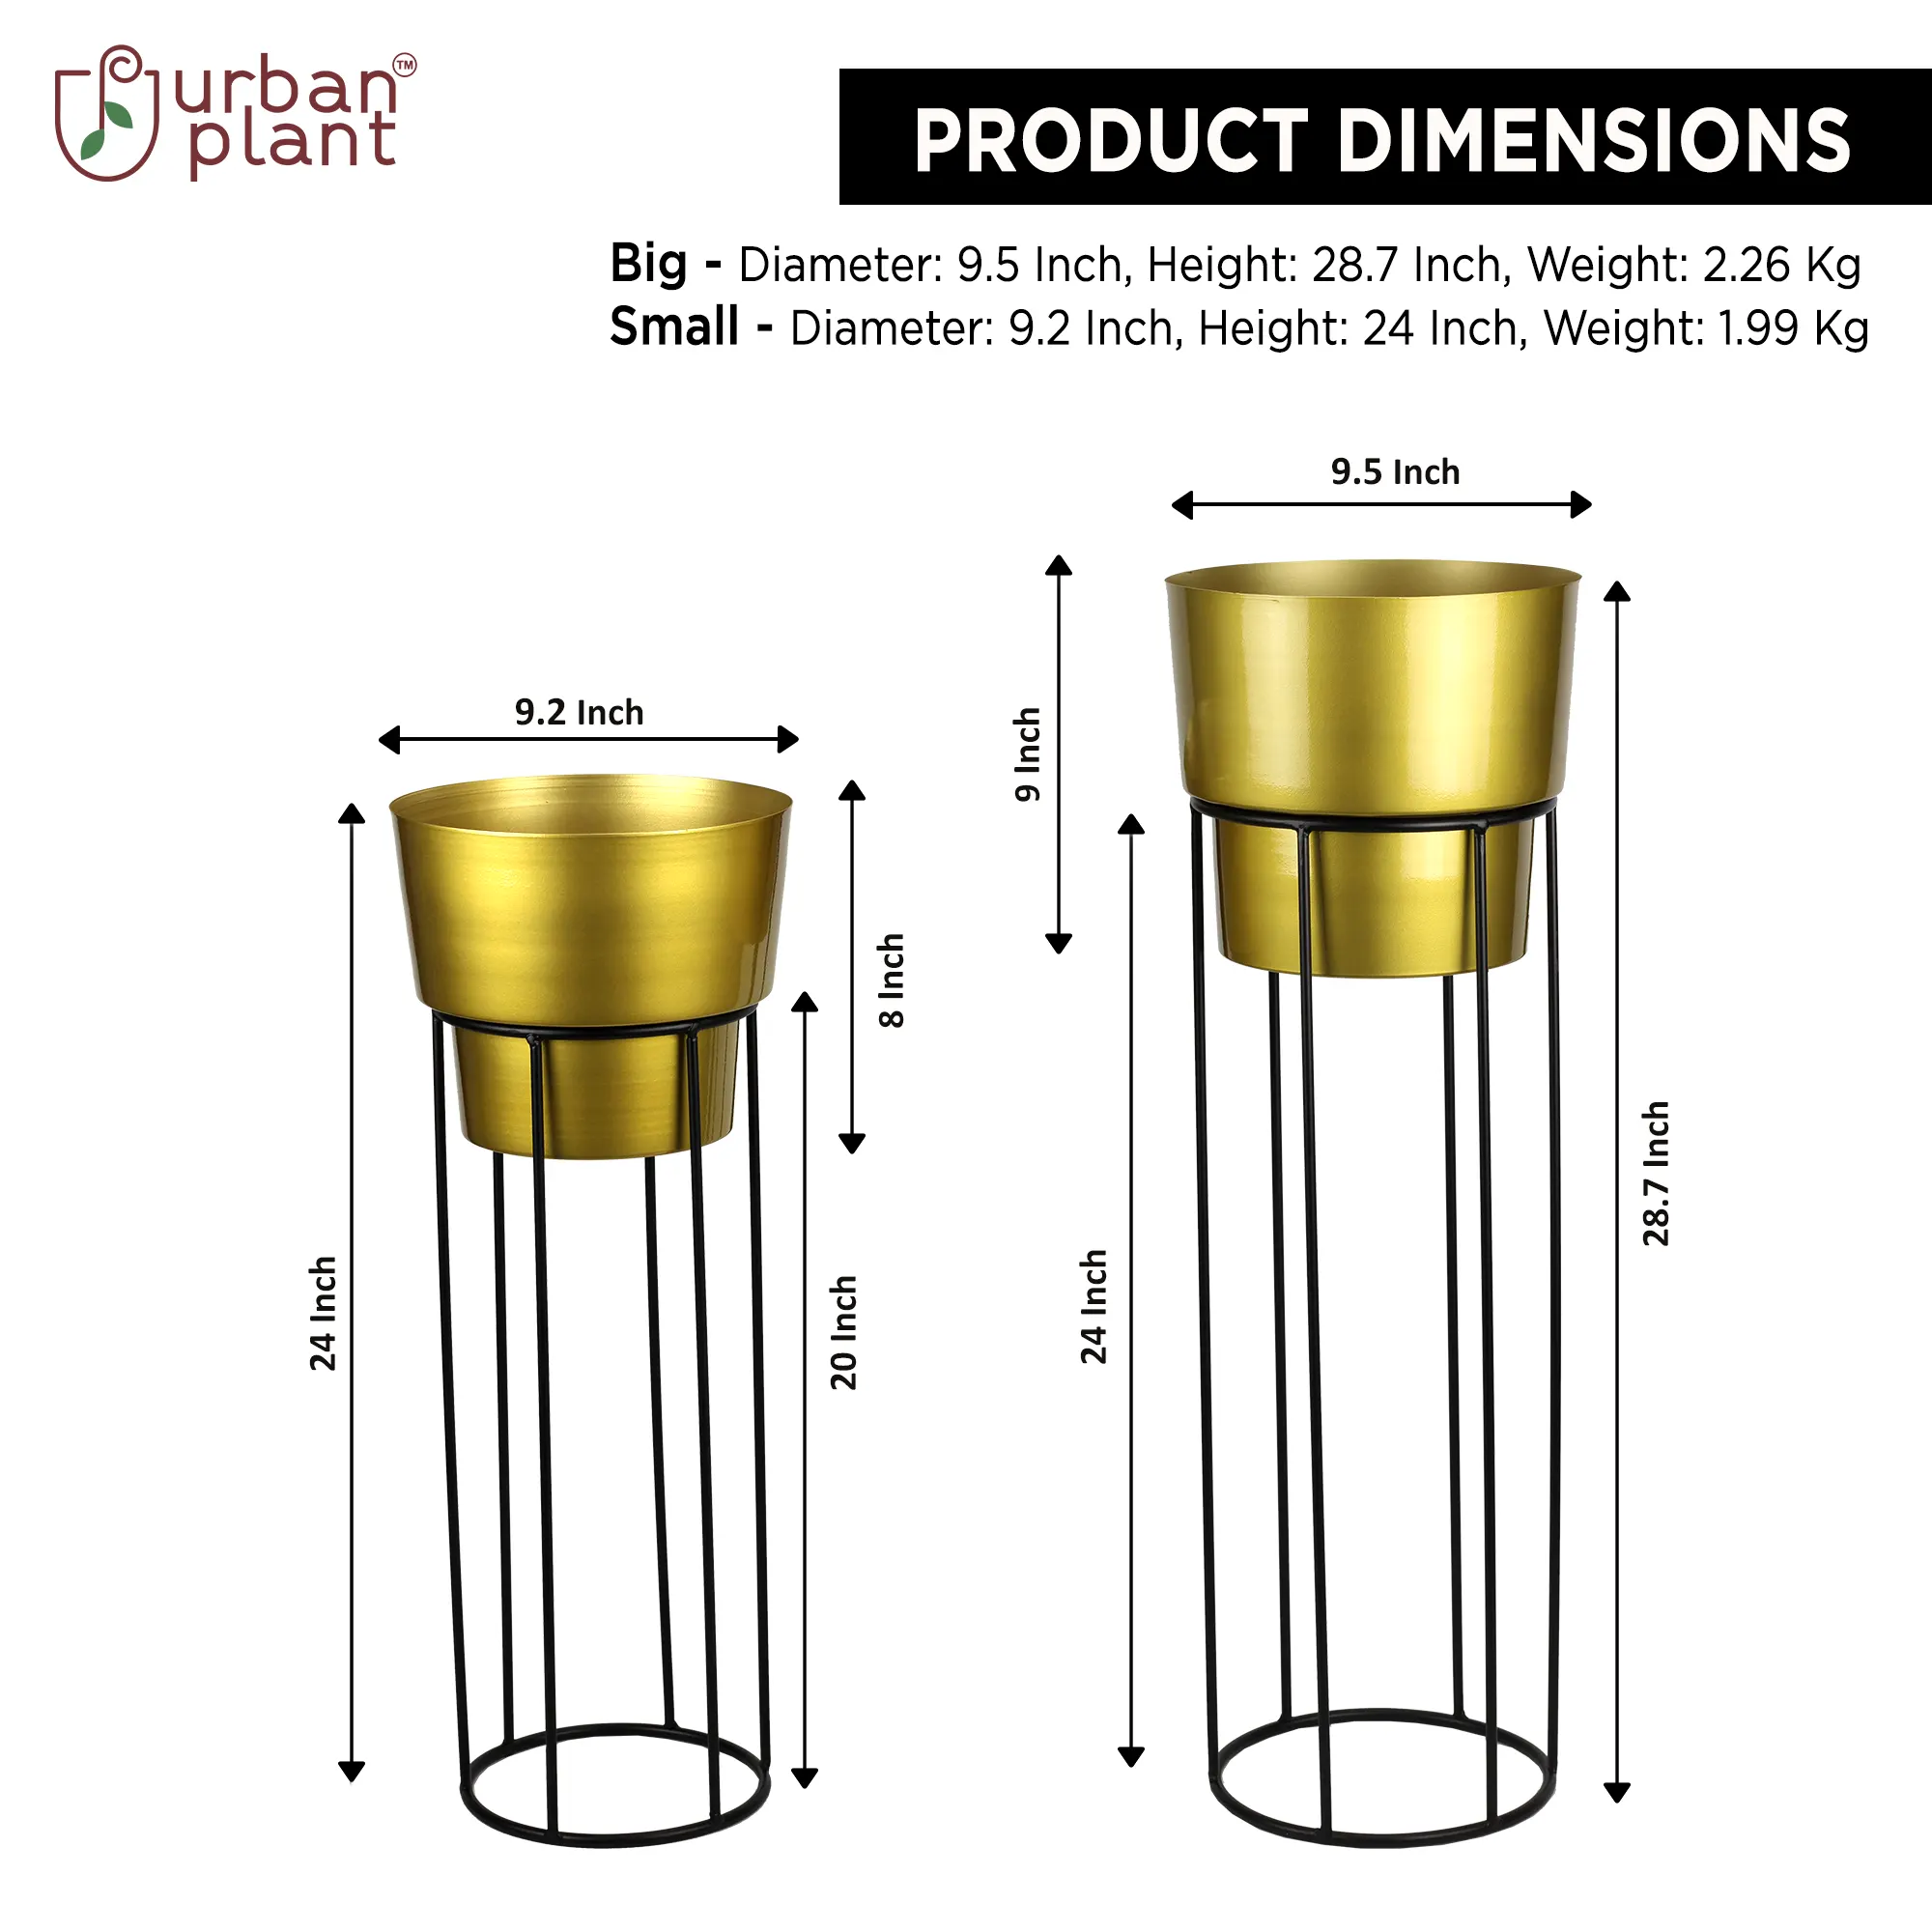 Classy Indoor Golden Metal Planters with Stand Big Size - Set of 2 Metal Planter Urban Plant 